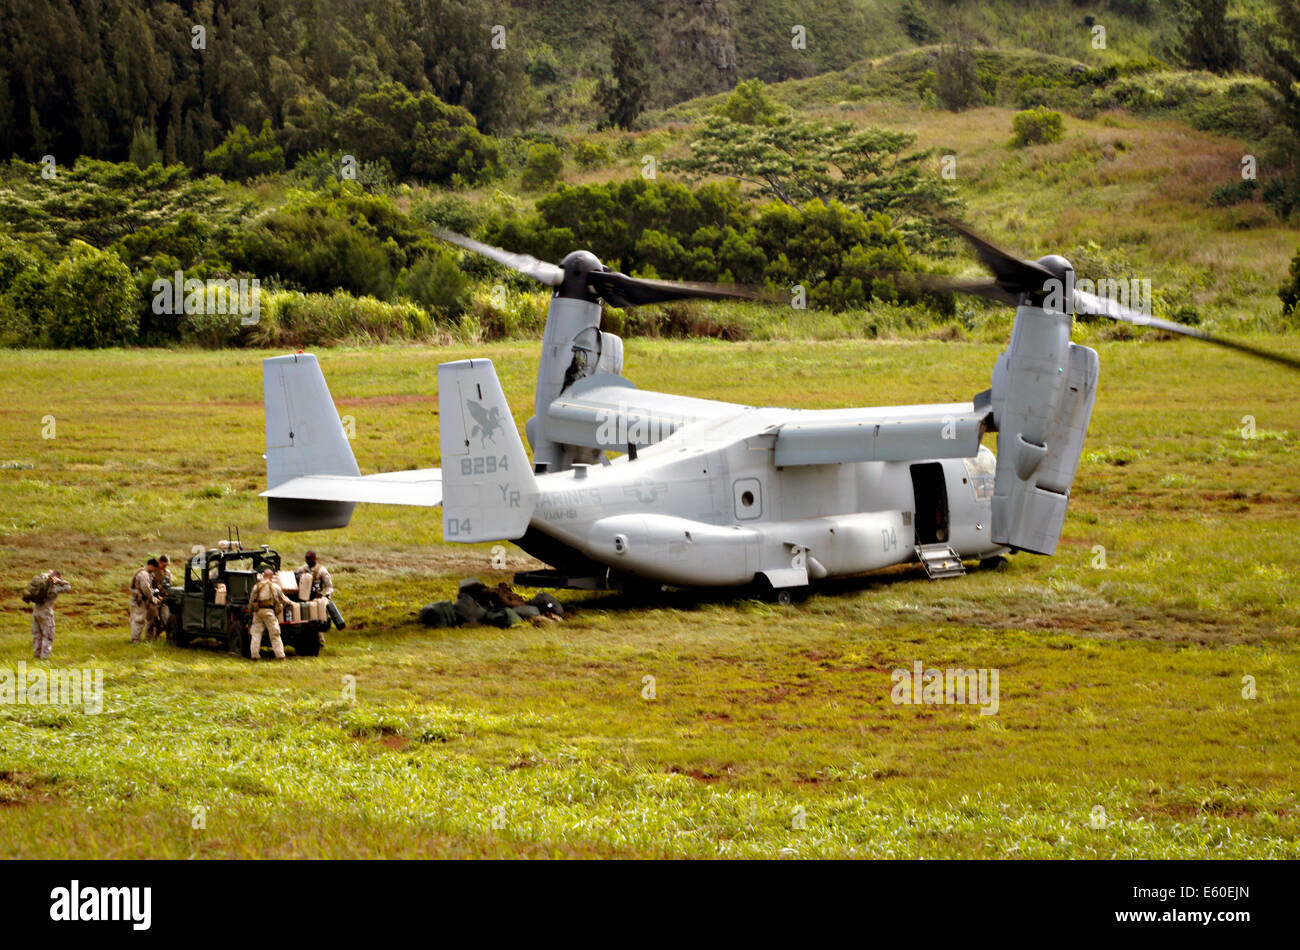 US Marines unload supplies from a MV-22 Osprey tiltrotor aircraft onto a ground unmanned support surrogate, a vehicle that can drive autonomously during experimental exercises as part of Rim of the Pacific July 11, 2014 at Kahuku Training Area, Hawaii. Stock Photo